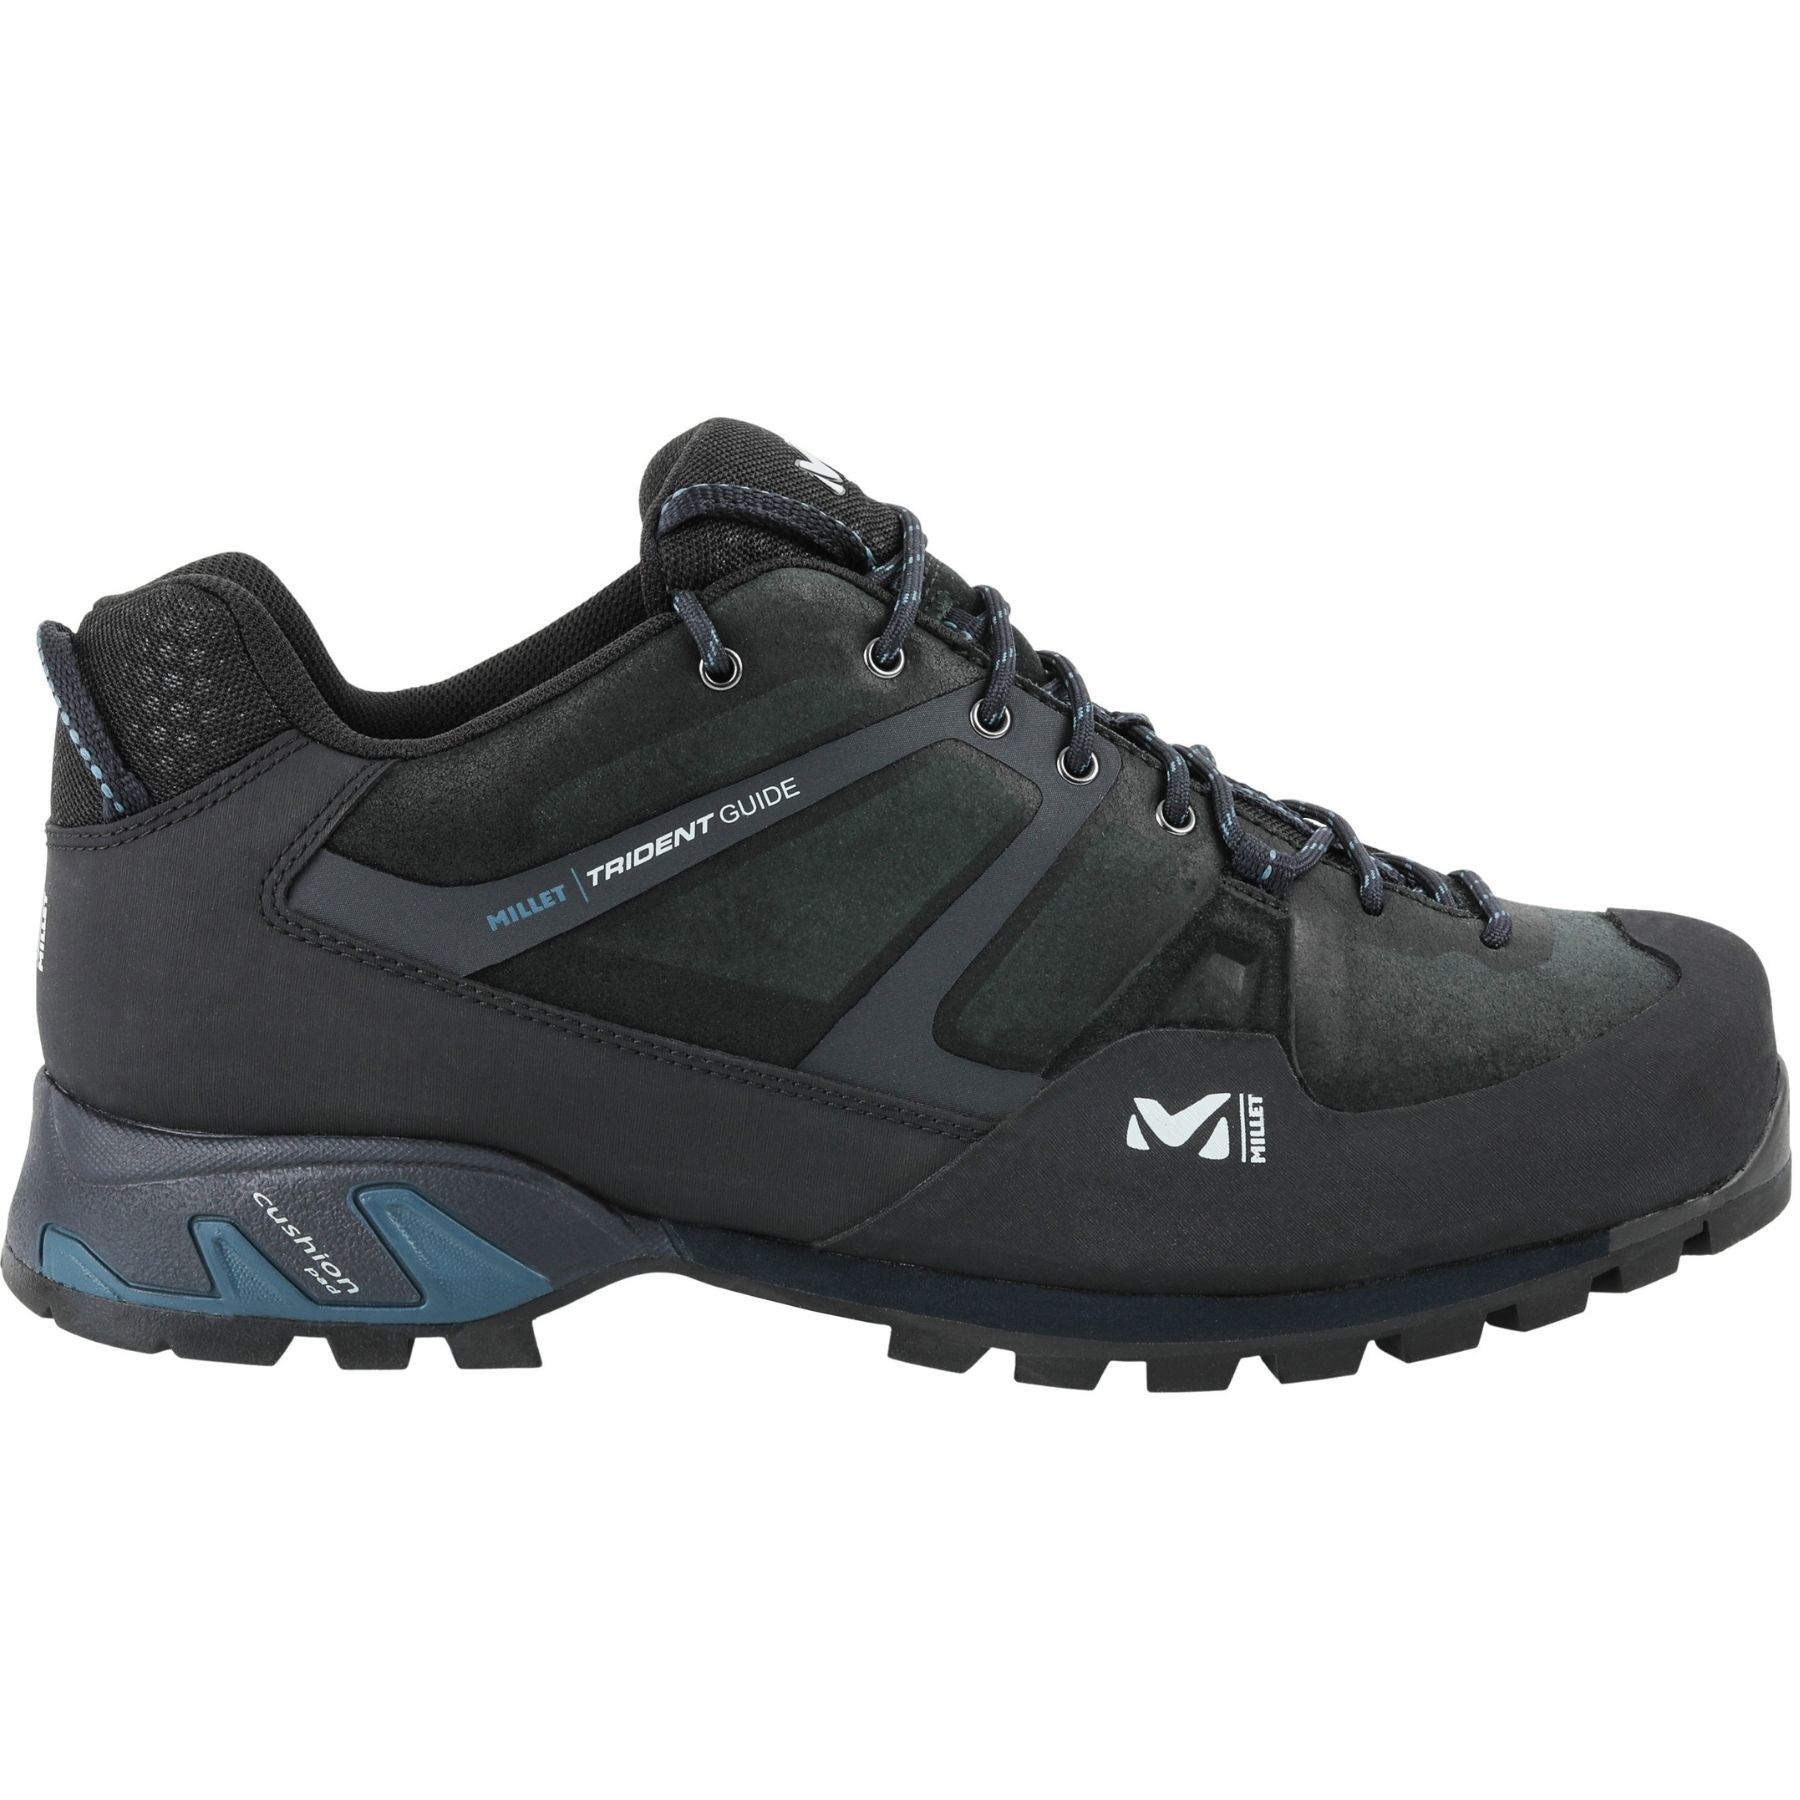 Millet Trident Guide - Chaussures approche | Hardloop